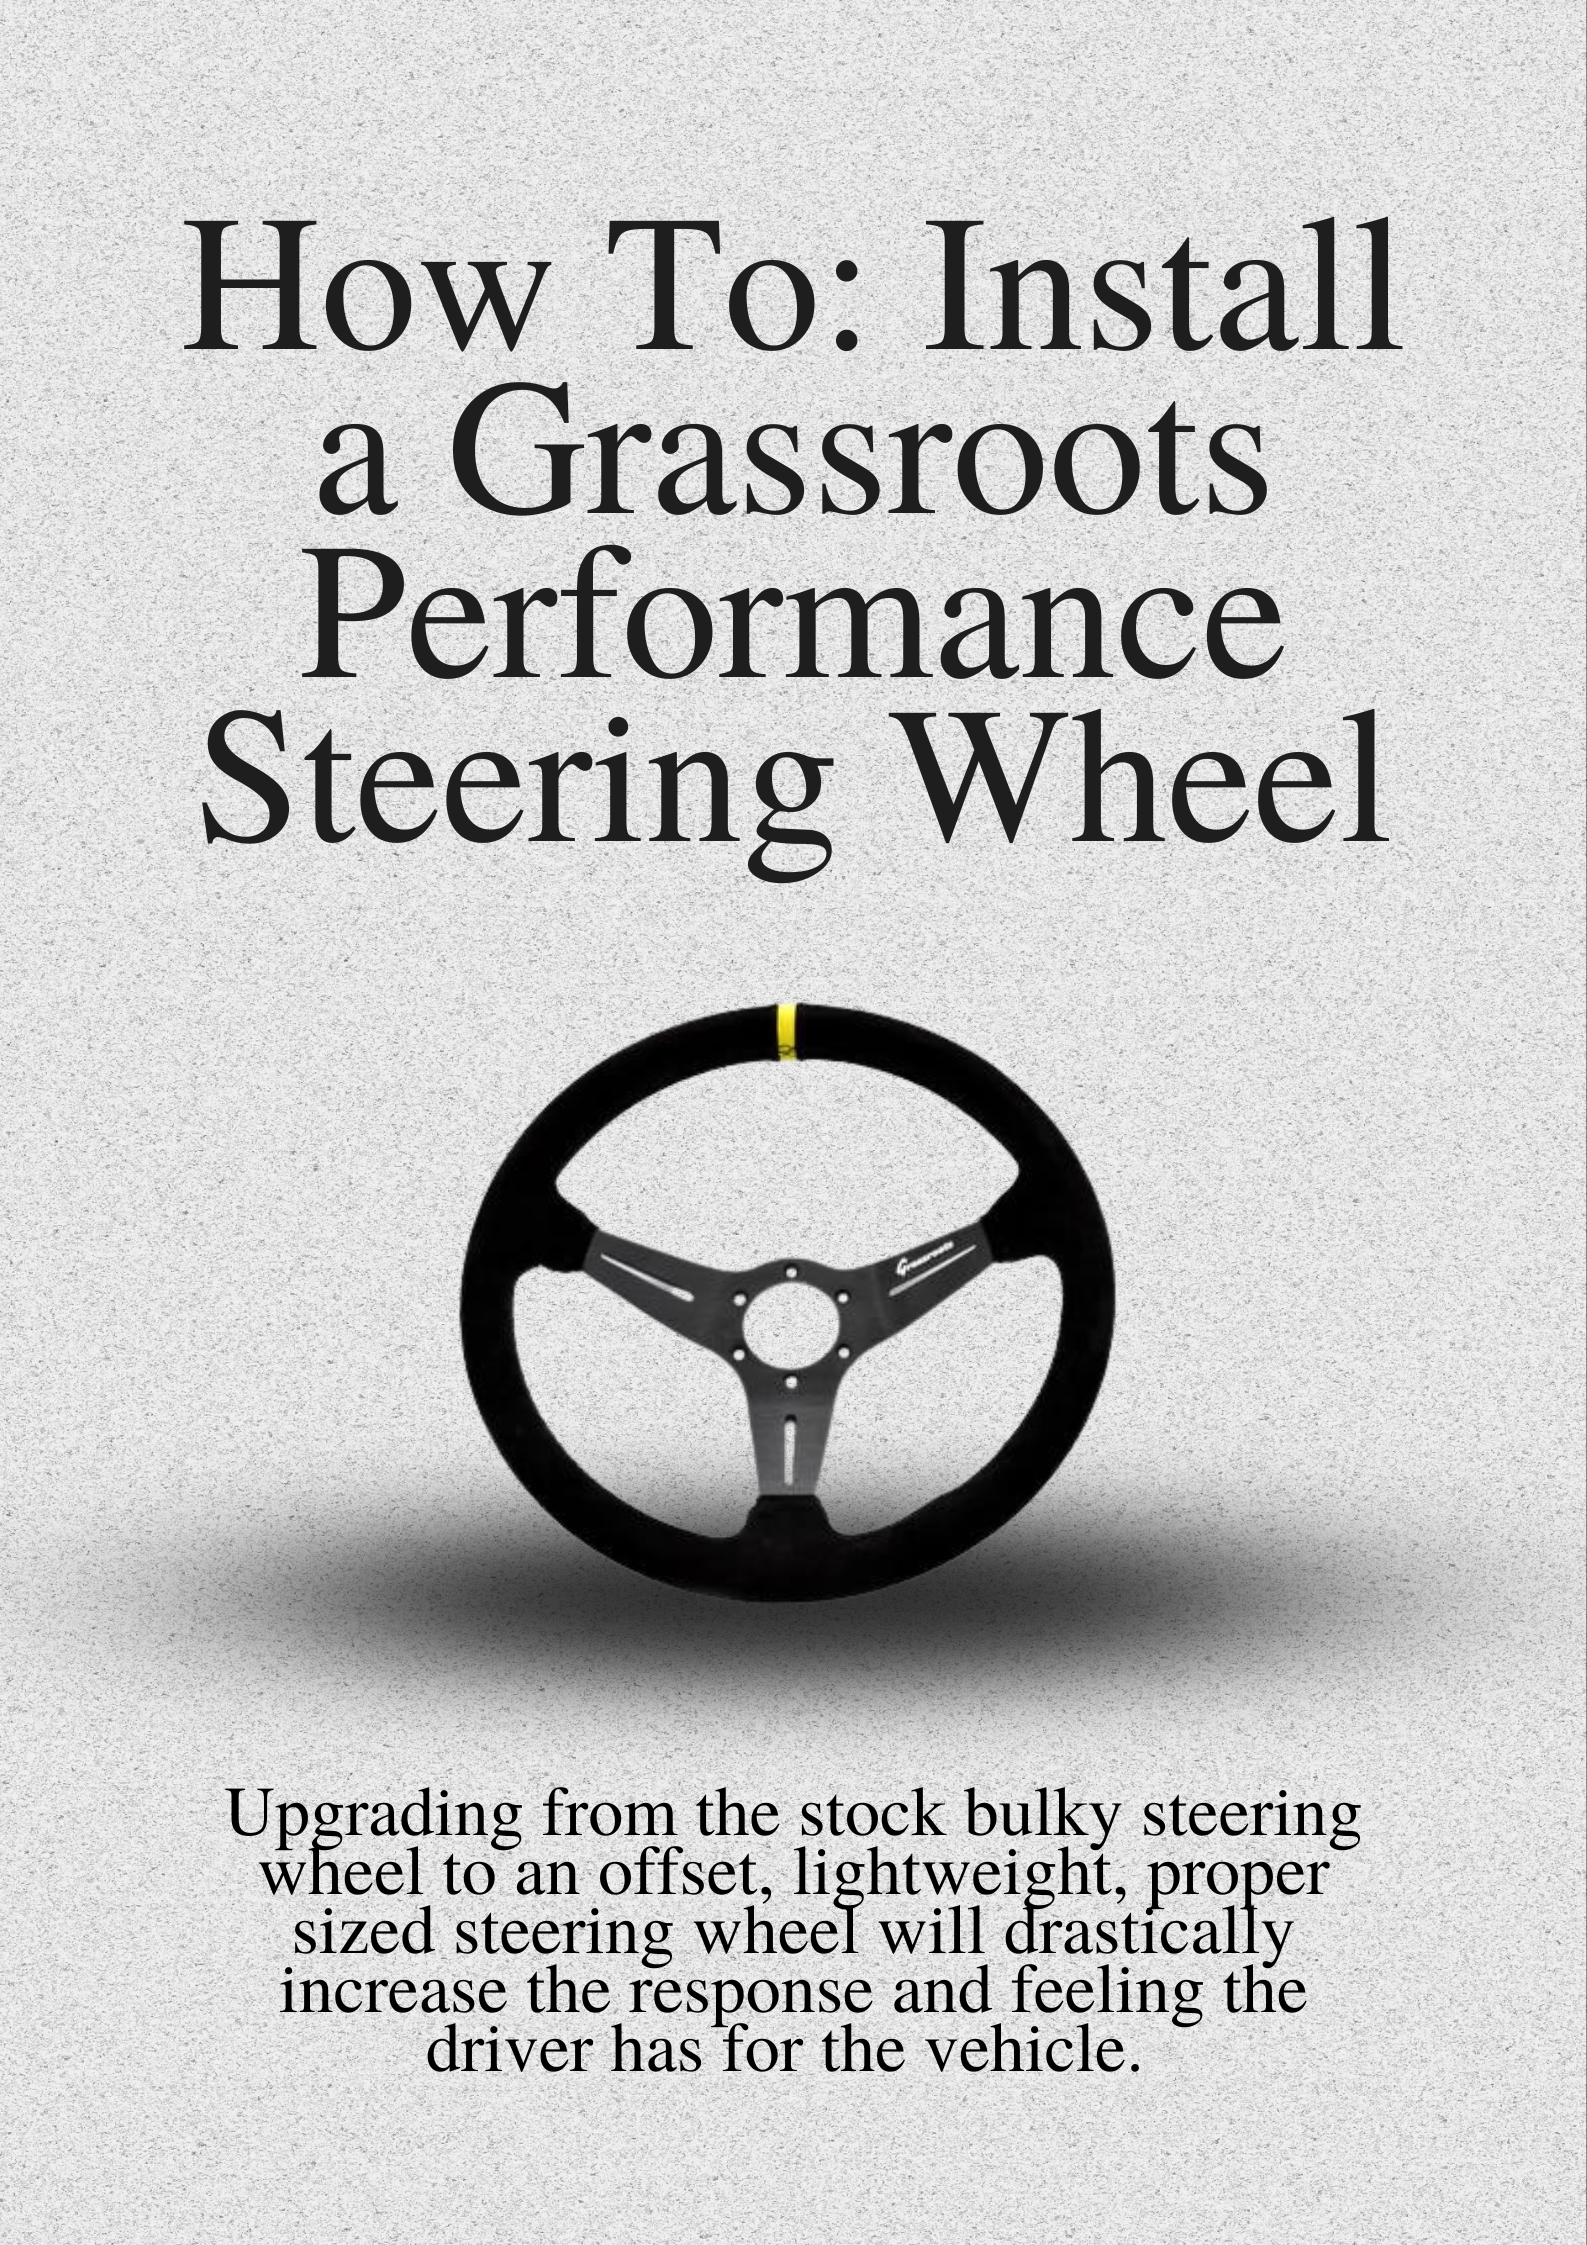 How To Install A Grassroots Performance Steering Wheel